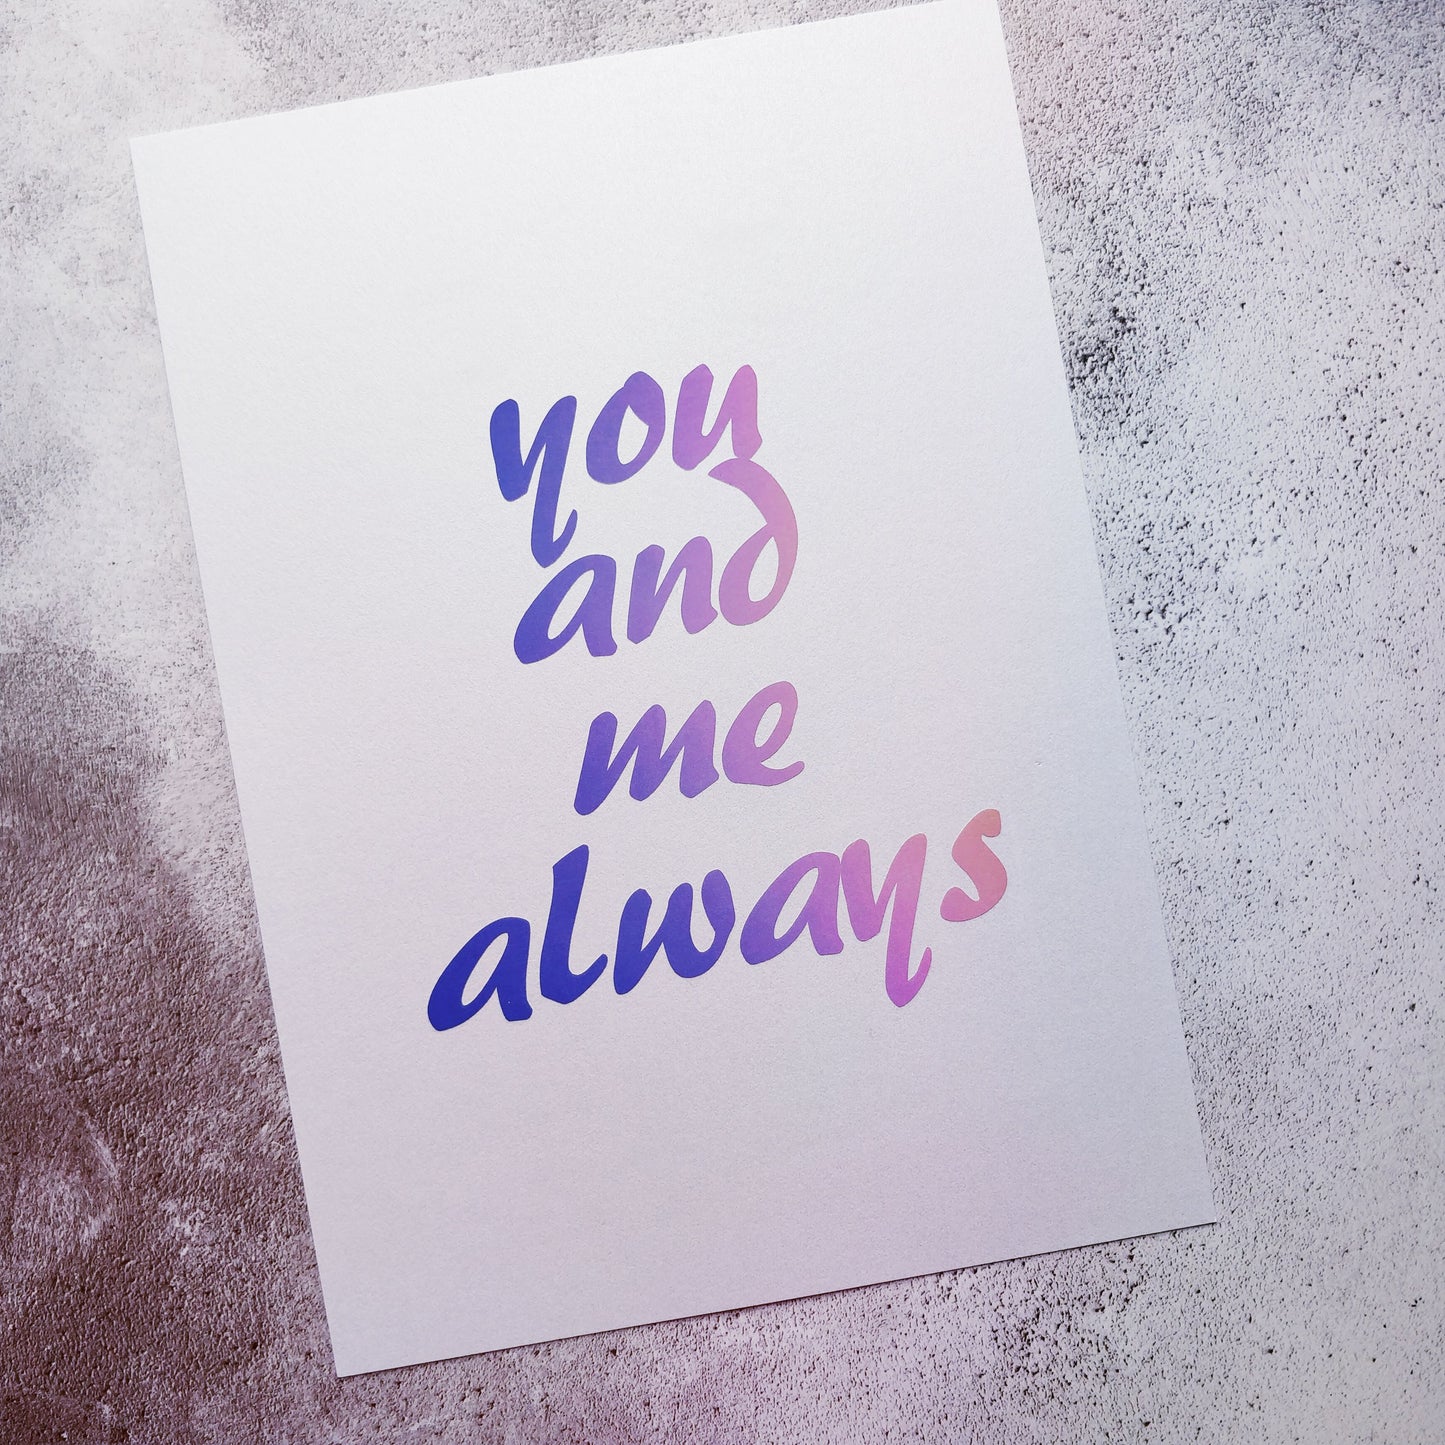 You and me always - A4 pearlescent Print - fay-dixon-design